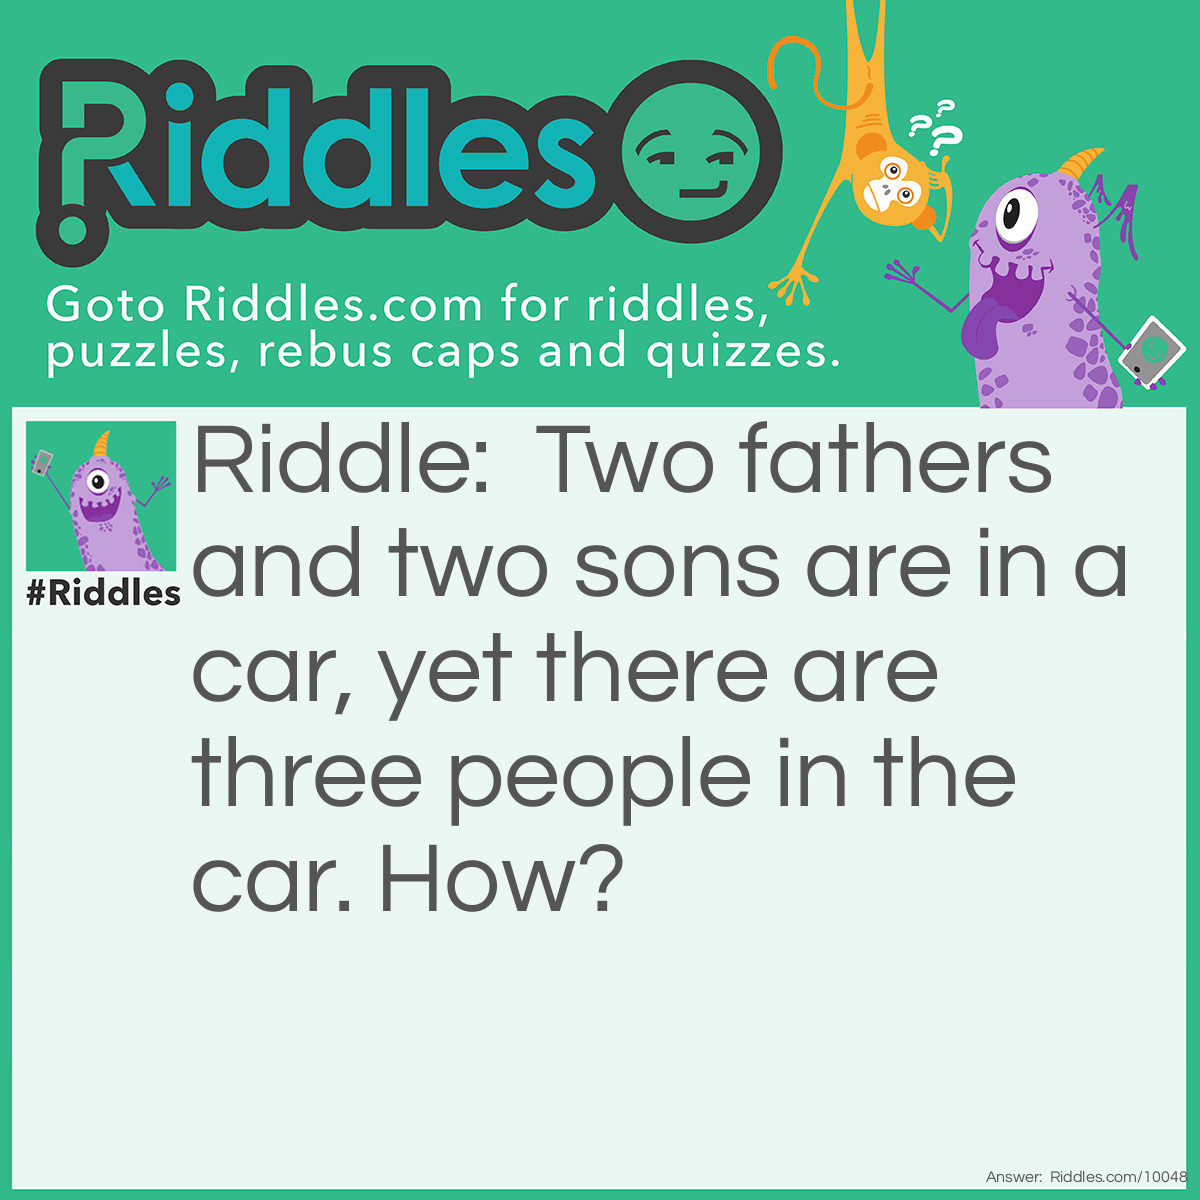 Riddle: Two fathers and two sons are in a car, yet there are three people in the car. How? Answer: They are grandfather, father and son.